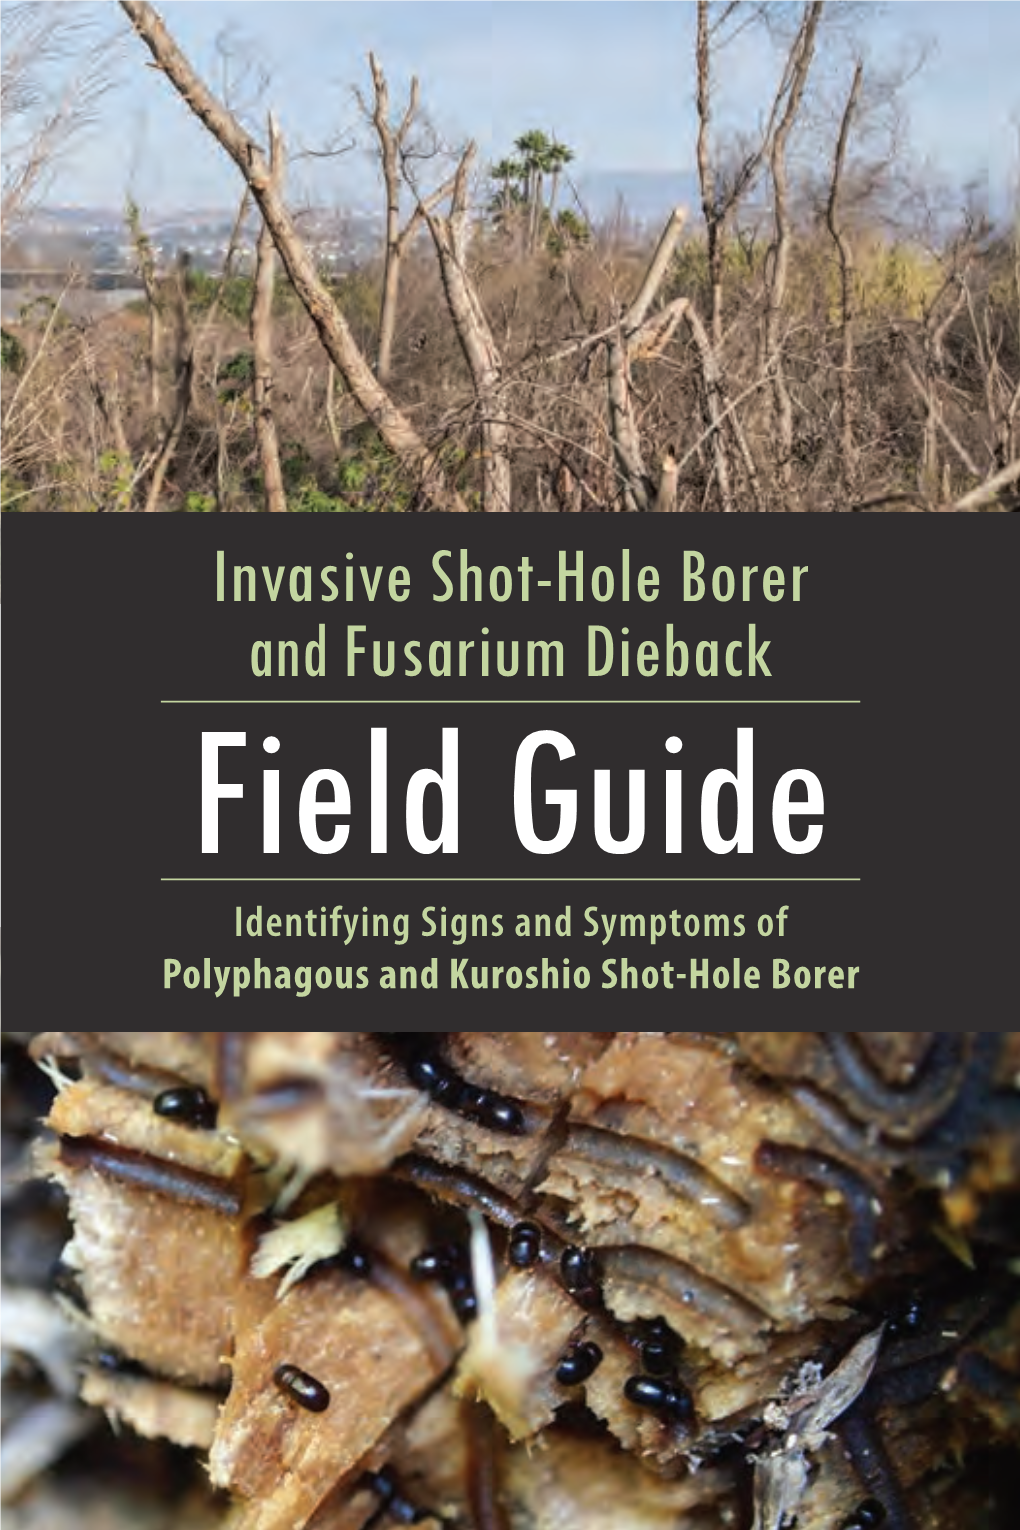 Invasive Shot-Hole Borer and Fusarium Dieback Field Guide Identifying Signs and Symptoms of Polyphagous and Kuroshio Shot-Hole Borer Authors P